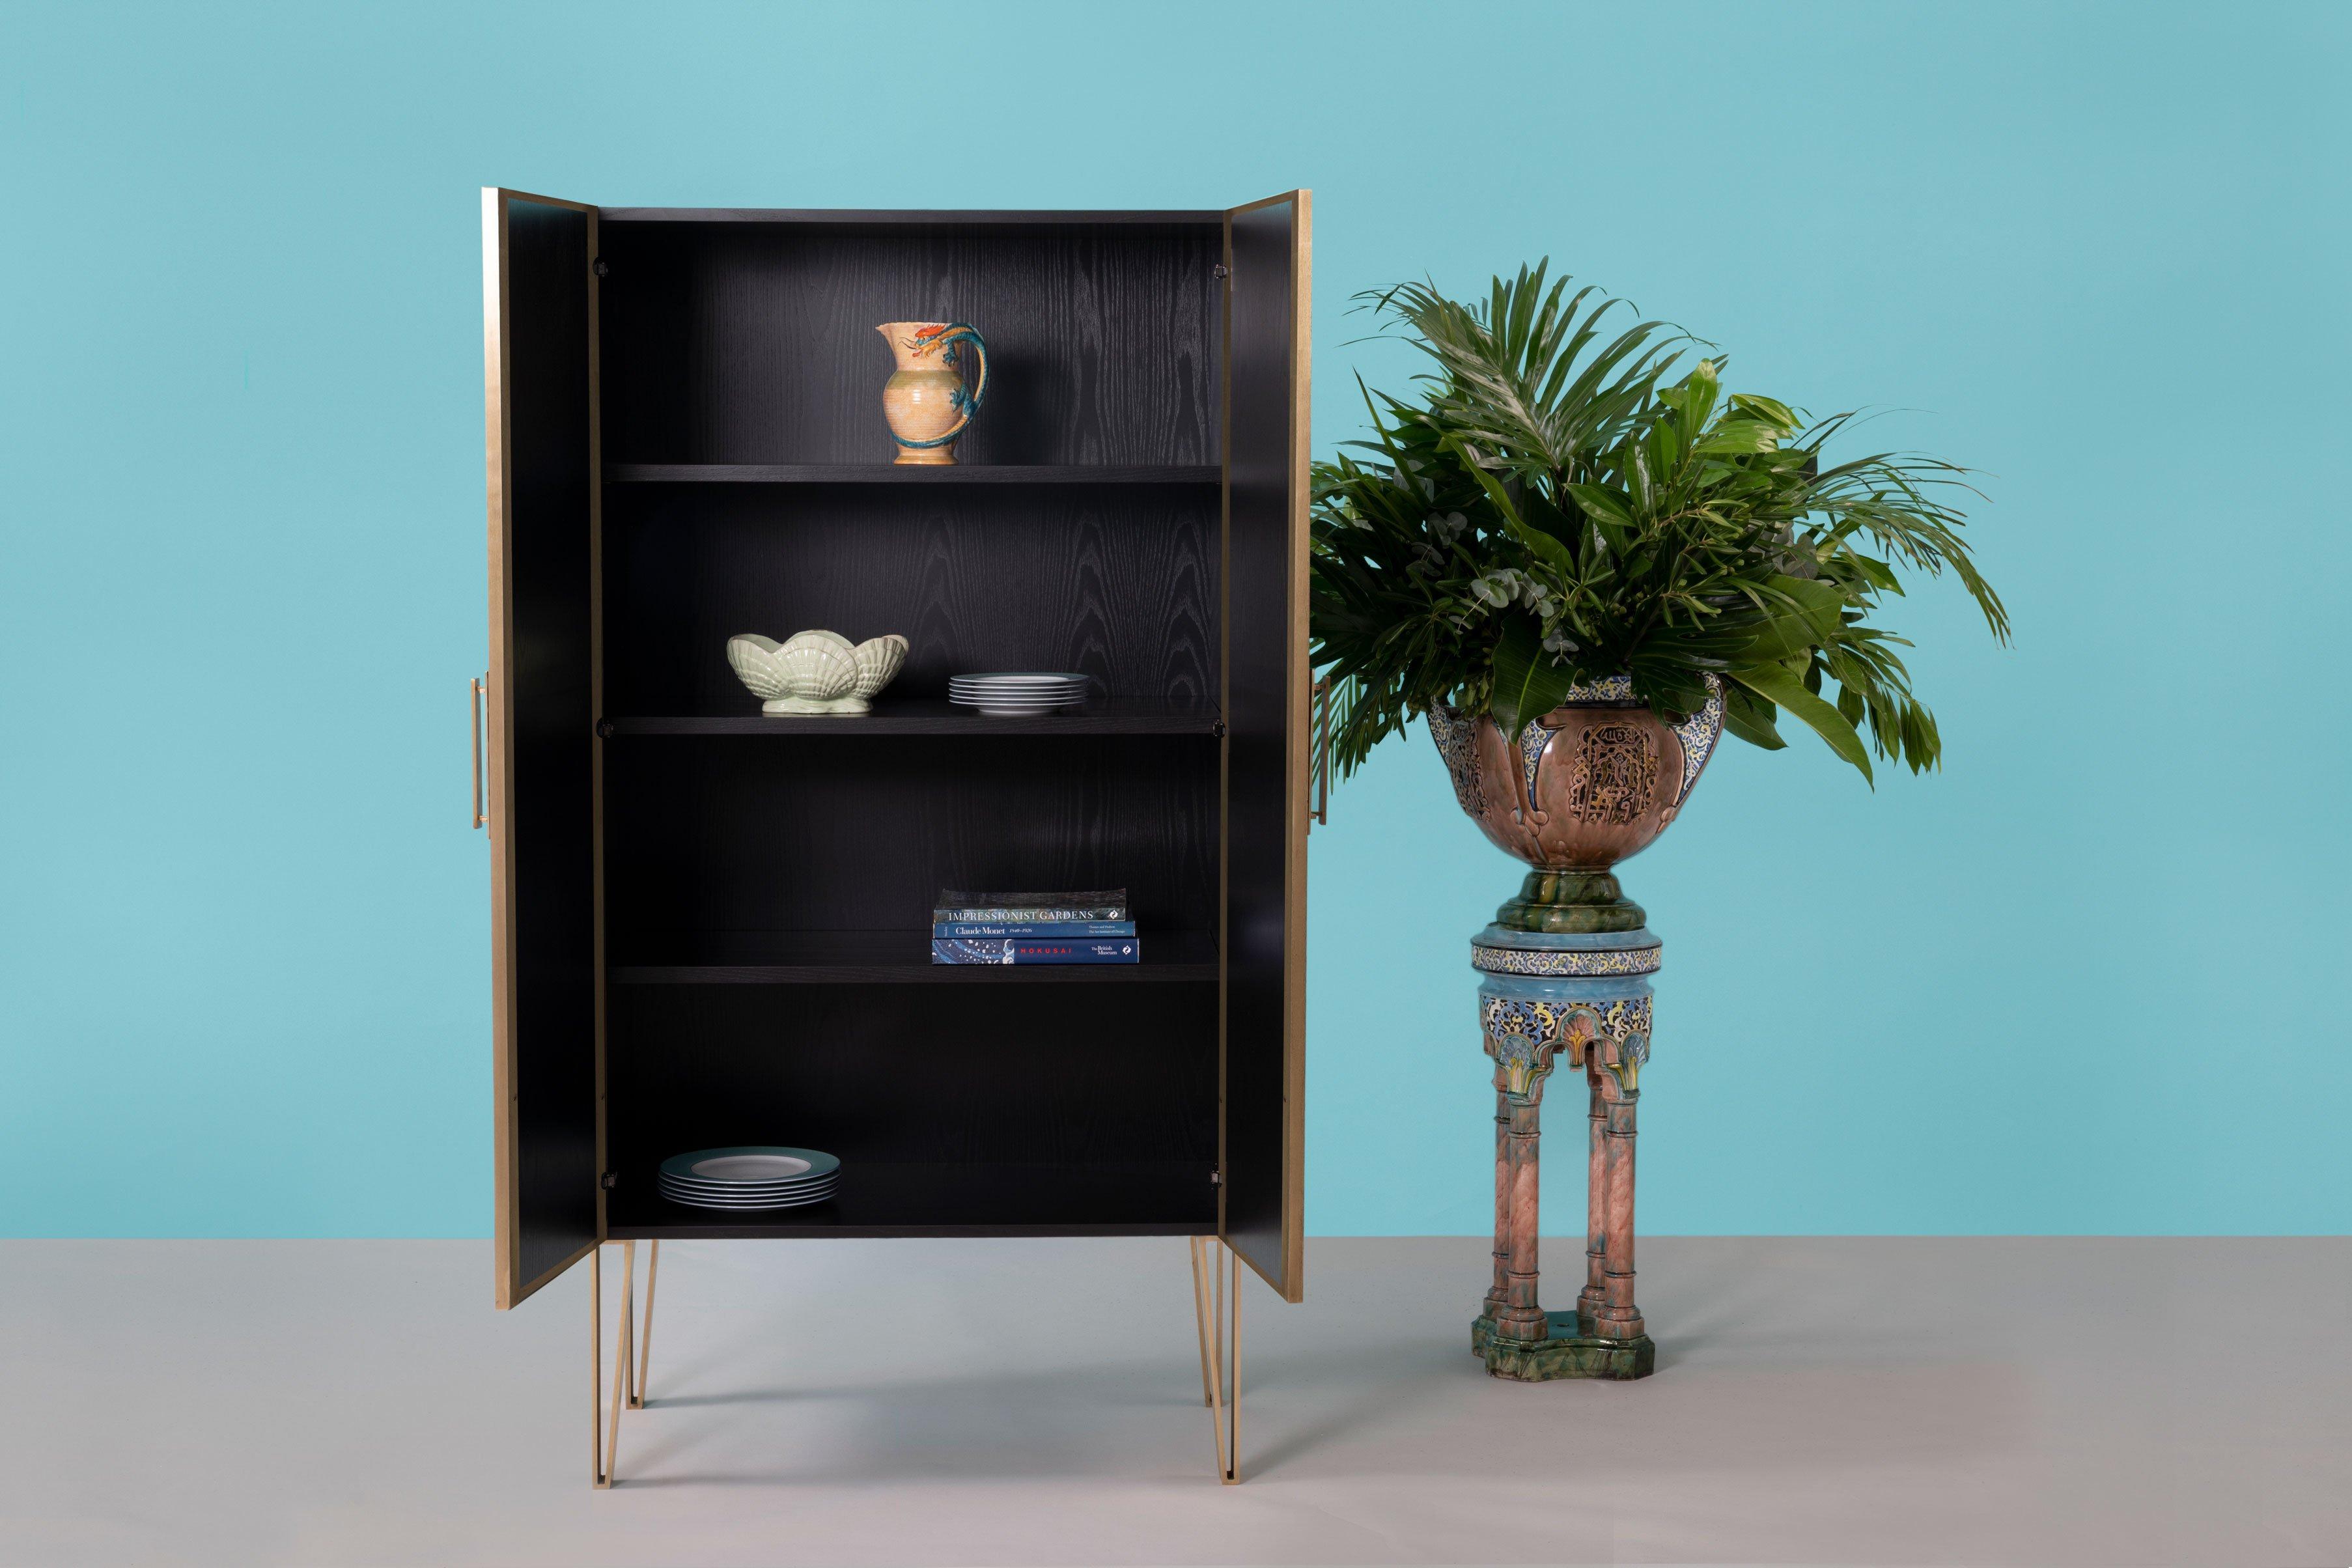 Fine Upholstered in Sophie Ward’s beautiful Botanical Feather print, the Cordelia cabinet is a bold, confident choice for any interior. 

Handcrafted in England from lacquered oak wood, this statement piece is upholstered in sumptuous silk-blend